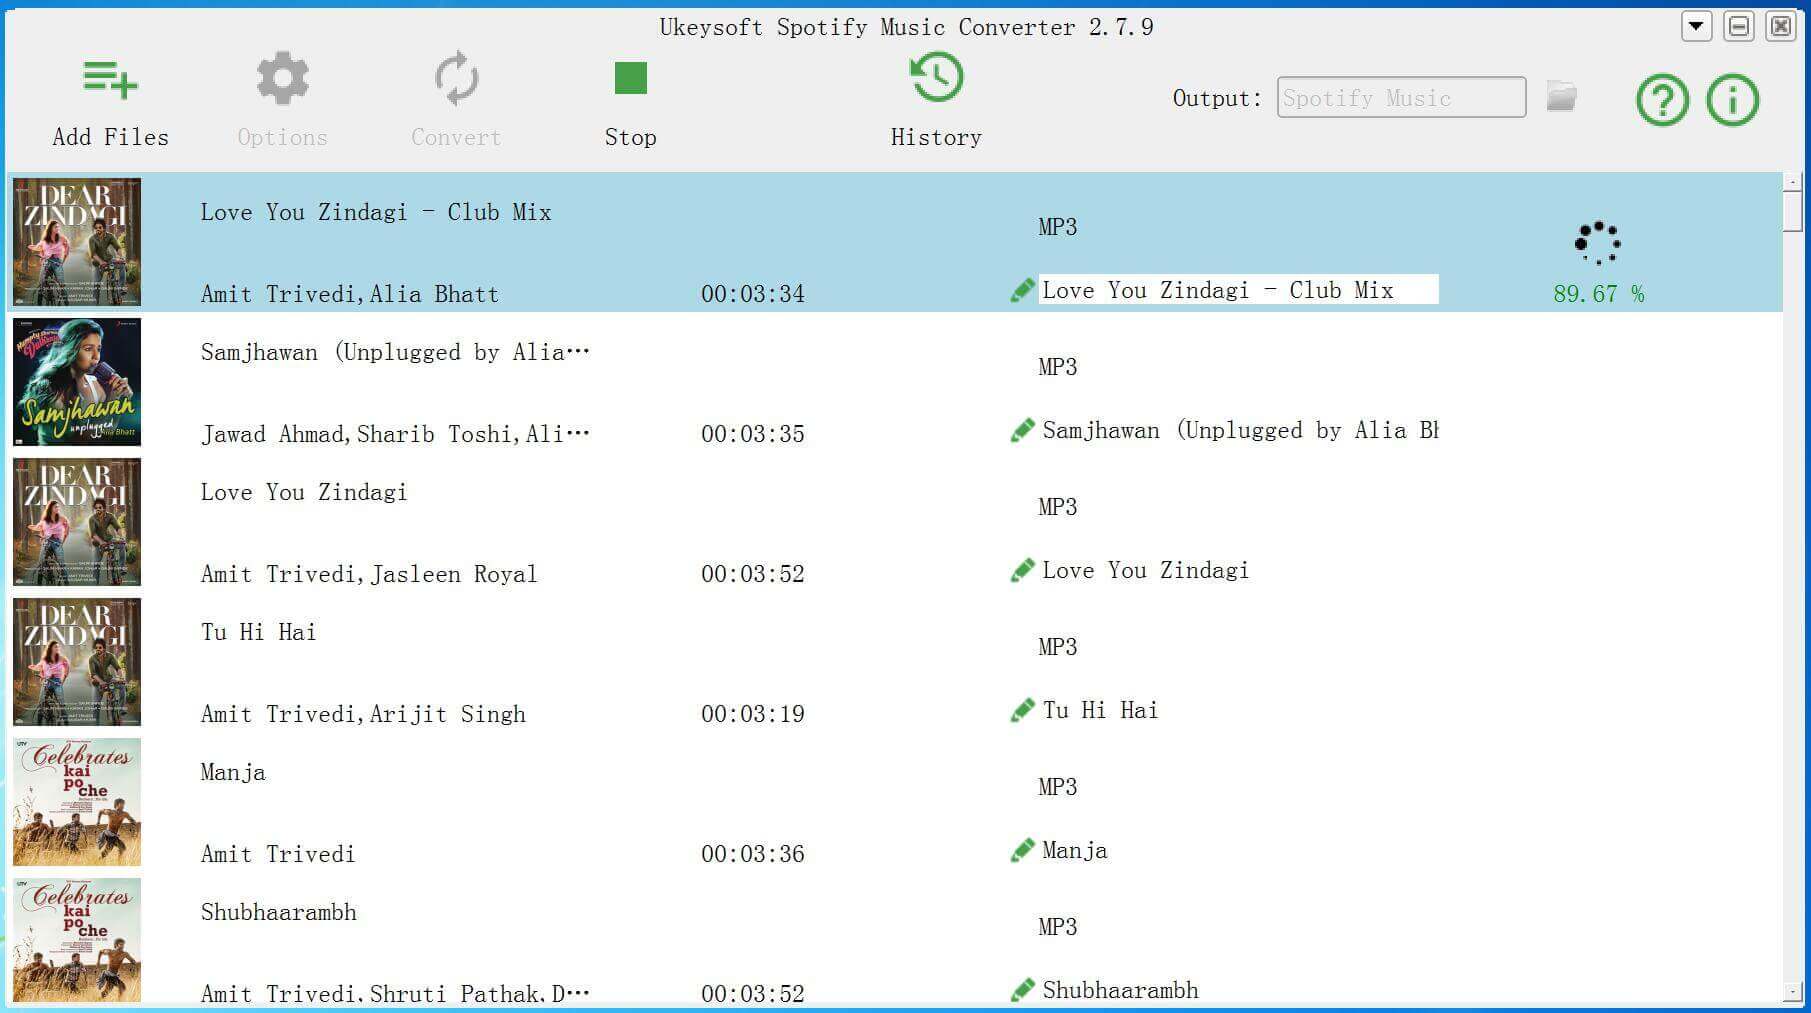 Download Hindi Songs from Spotify to mp3 